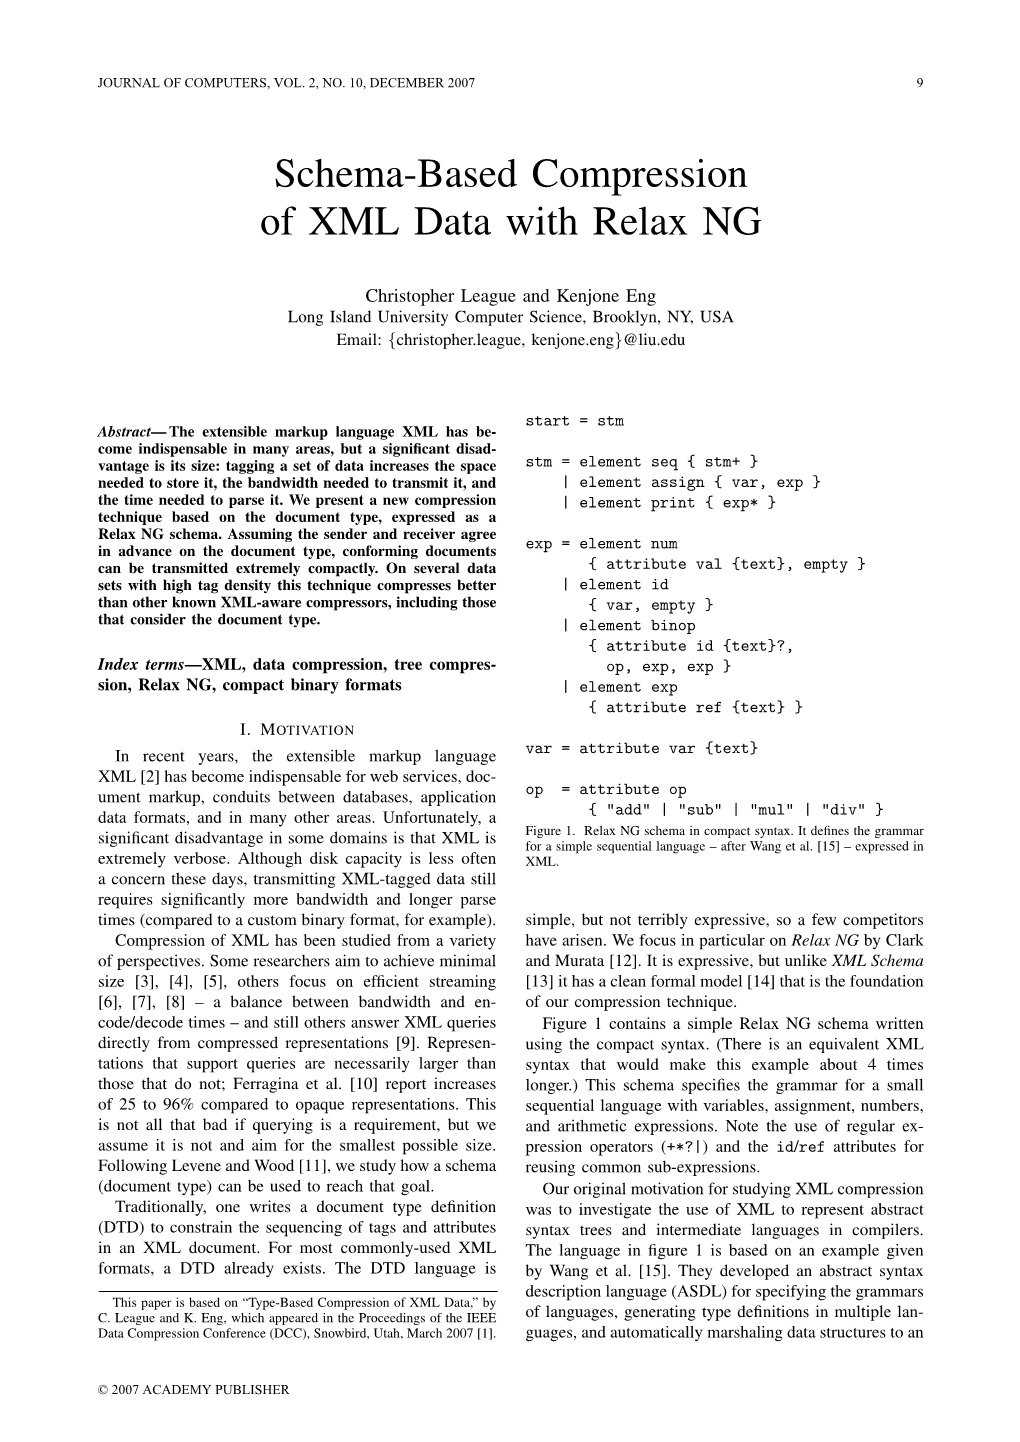 Schema-Based Compression of XML Data with Relax NG